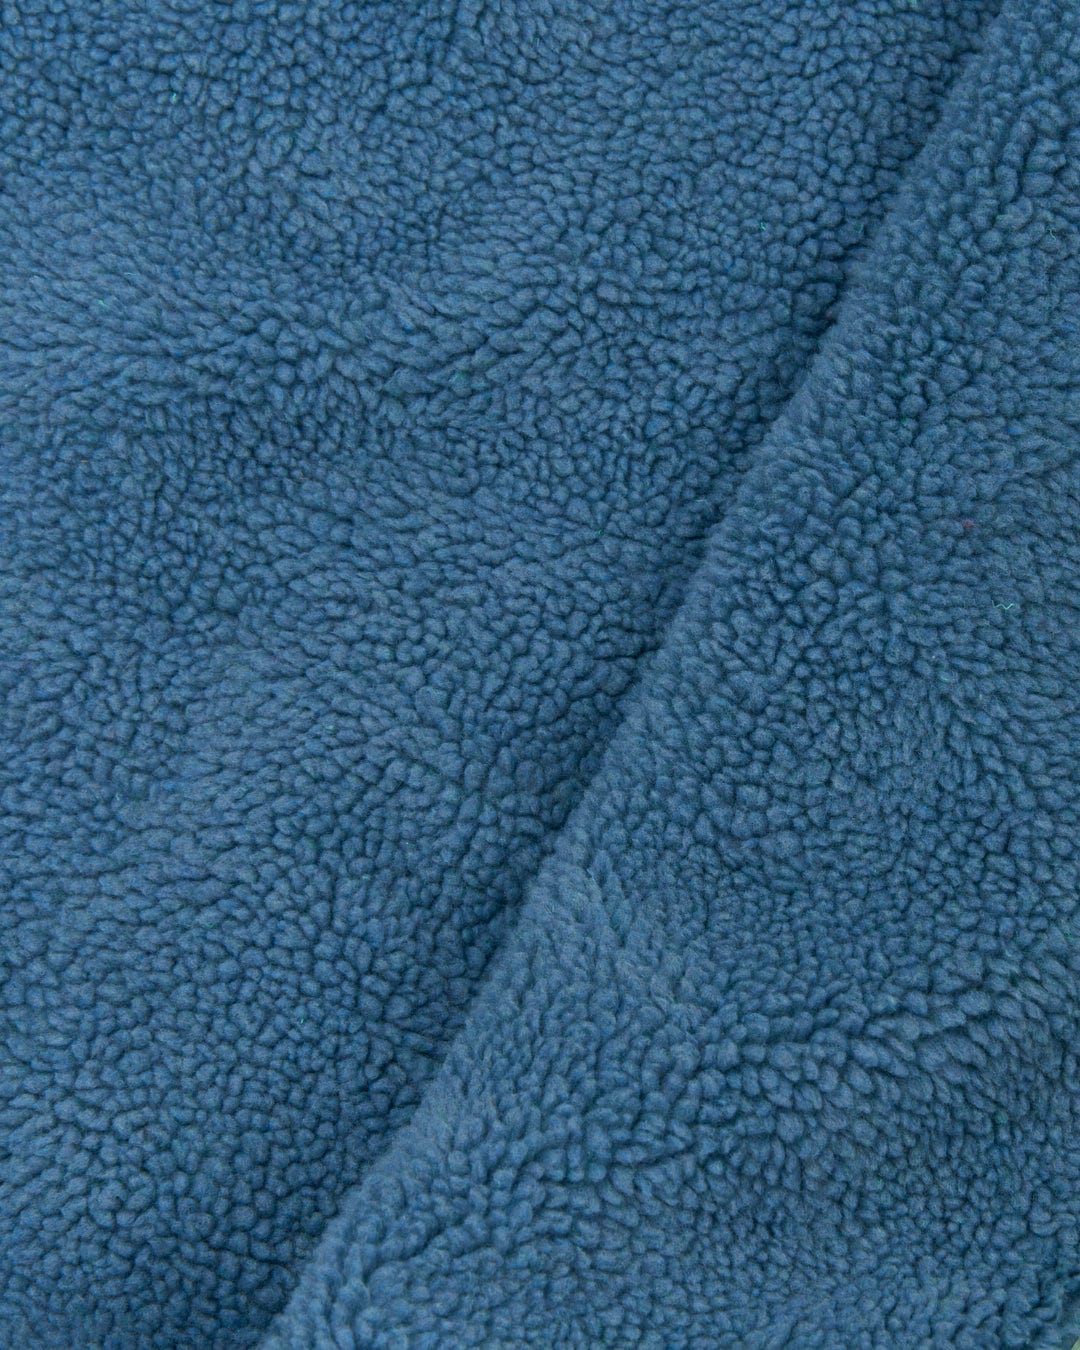 Close-up of a blue textured fabric with a soft, fluffy pile made from the Recycled Four Seasons Changing Robe in Light Green by Saltrock.